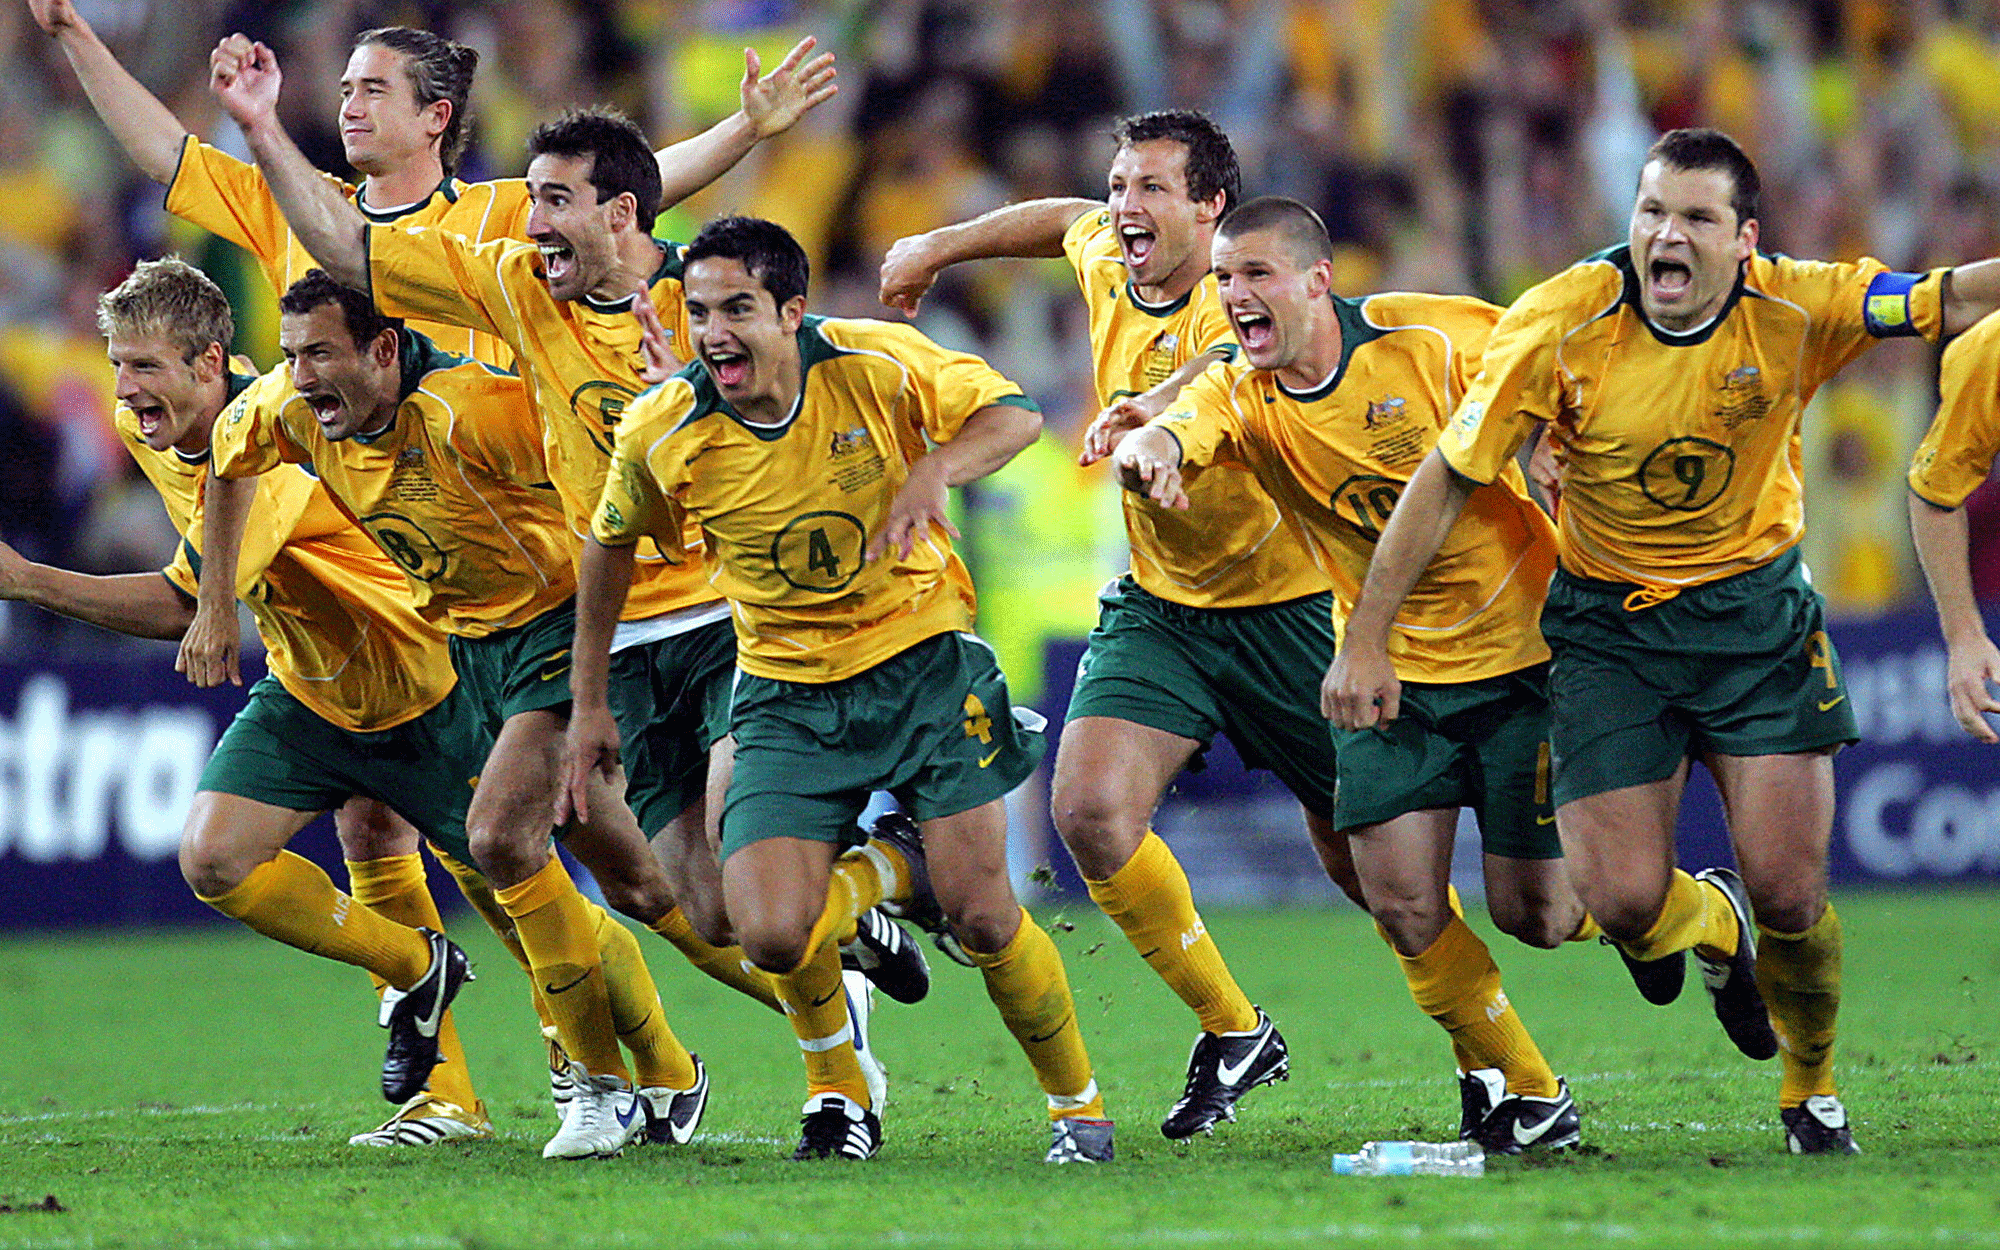 Watch: Full match of Socceroos v Uruguay in FIFA World Cup 2006 play